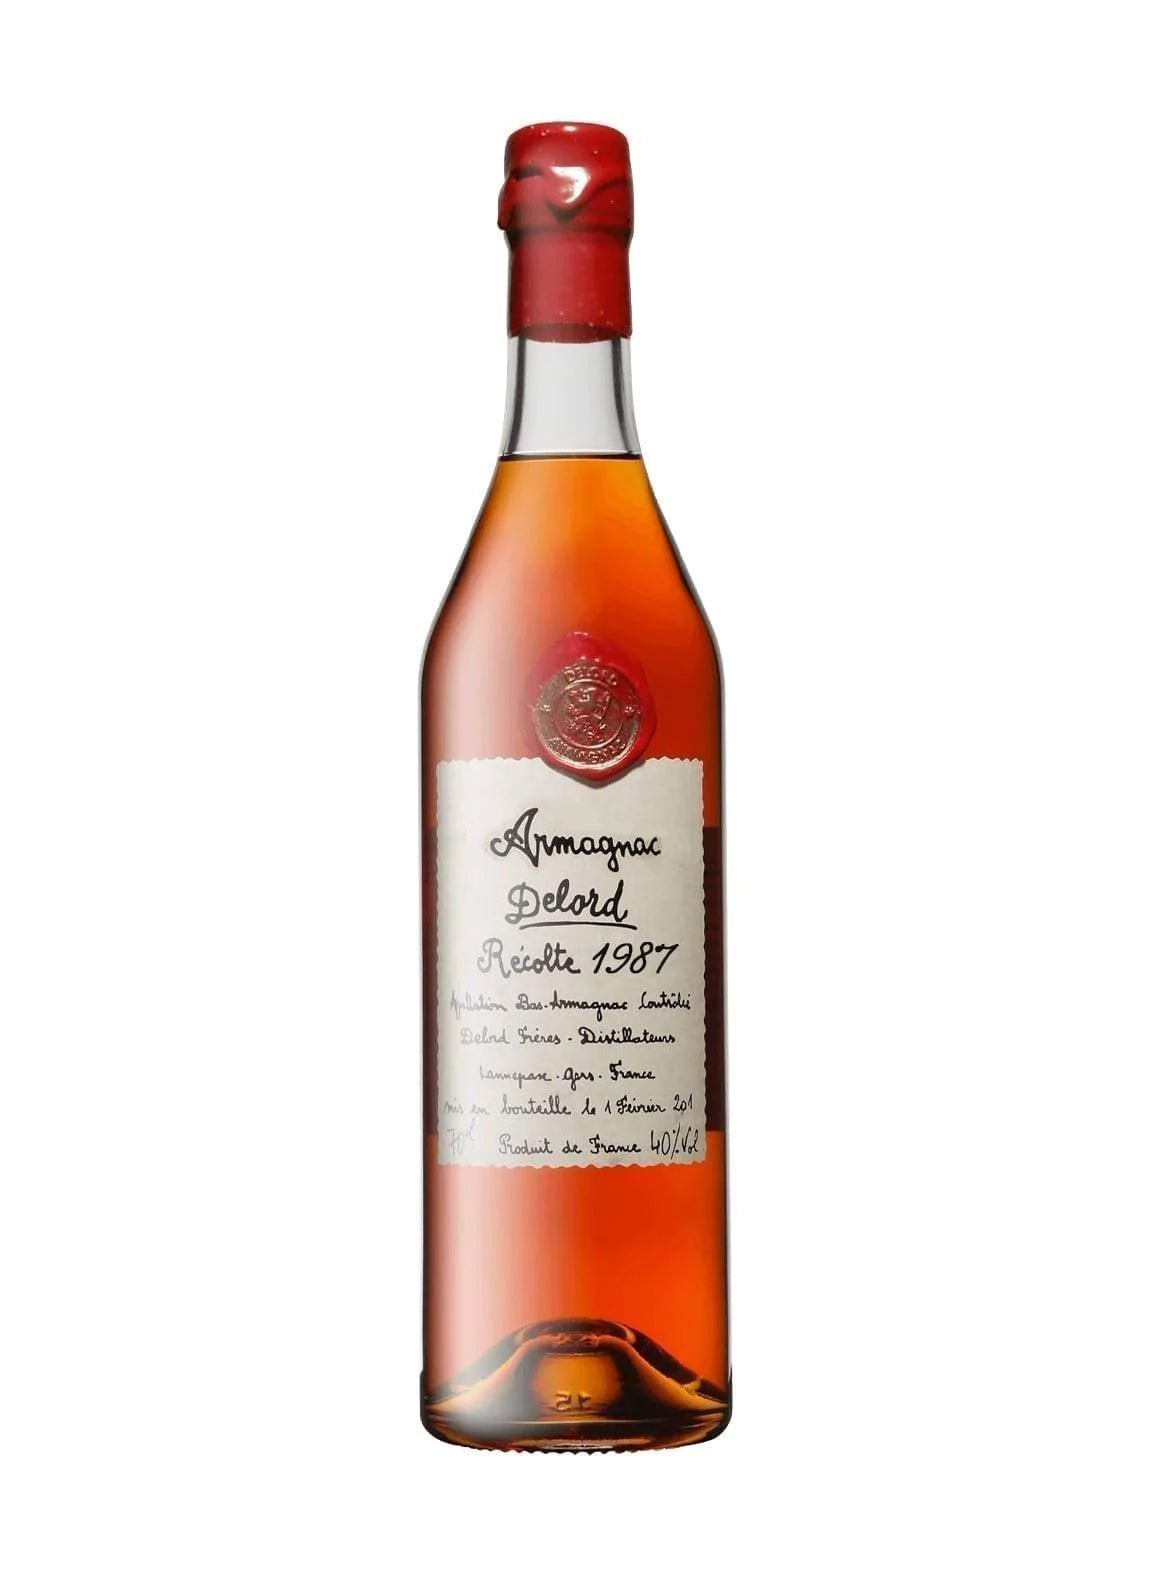 Delord 1987 Armagnac 40% 700ml | Brandy | Shop online at Spirits of France